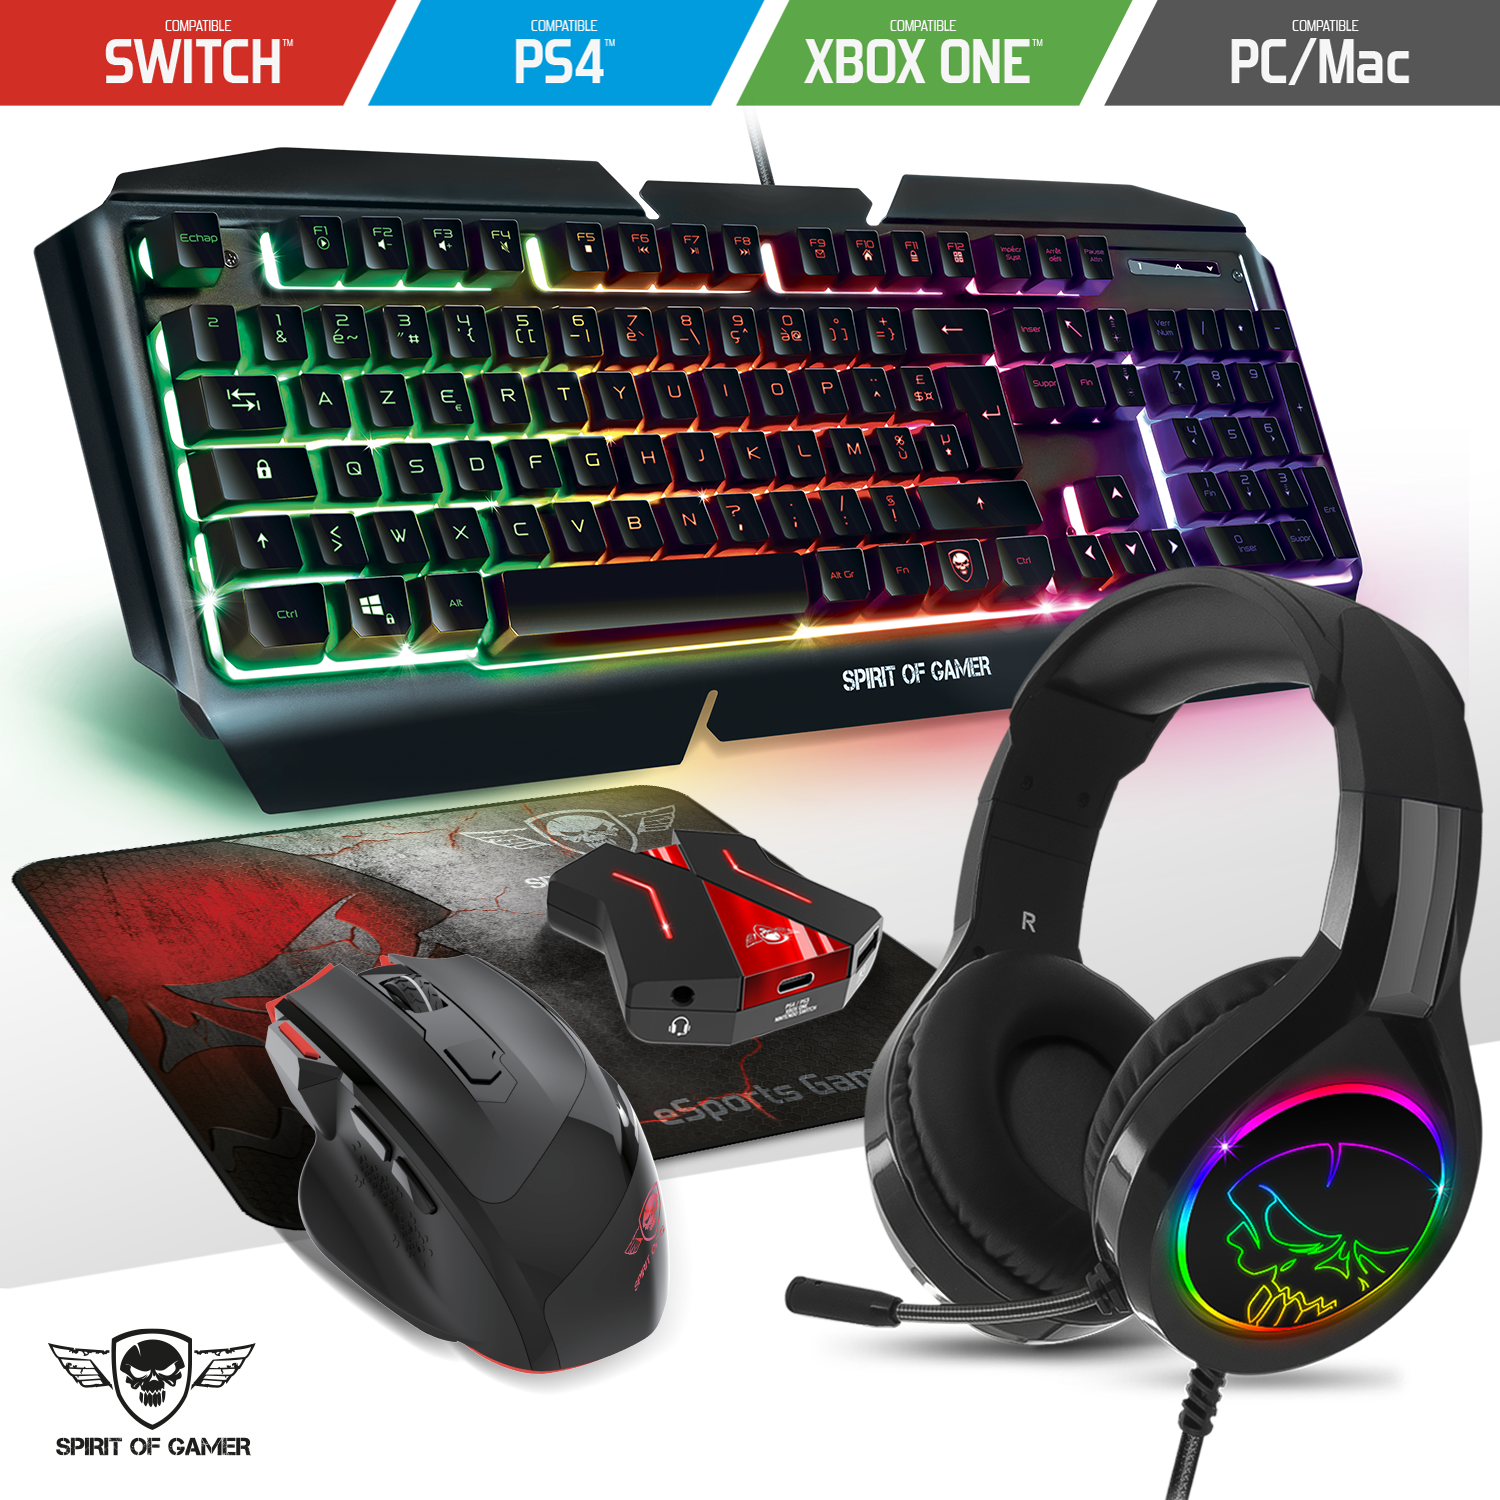 Pack Cross Gamer Pro Clavier Souris Tapis Casque Convertisseur pour Xbox  One PS4 PS3 Switch